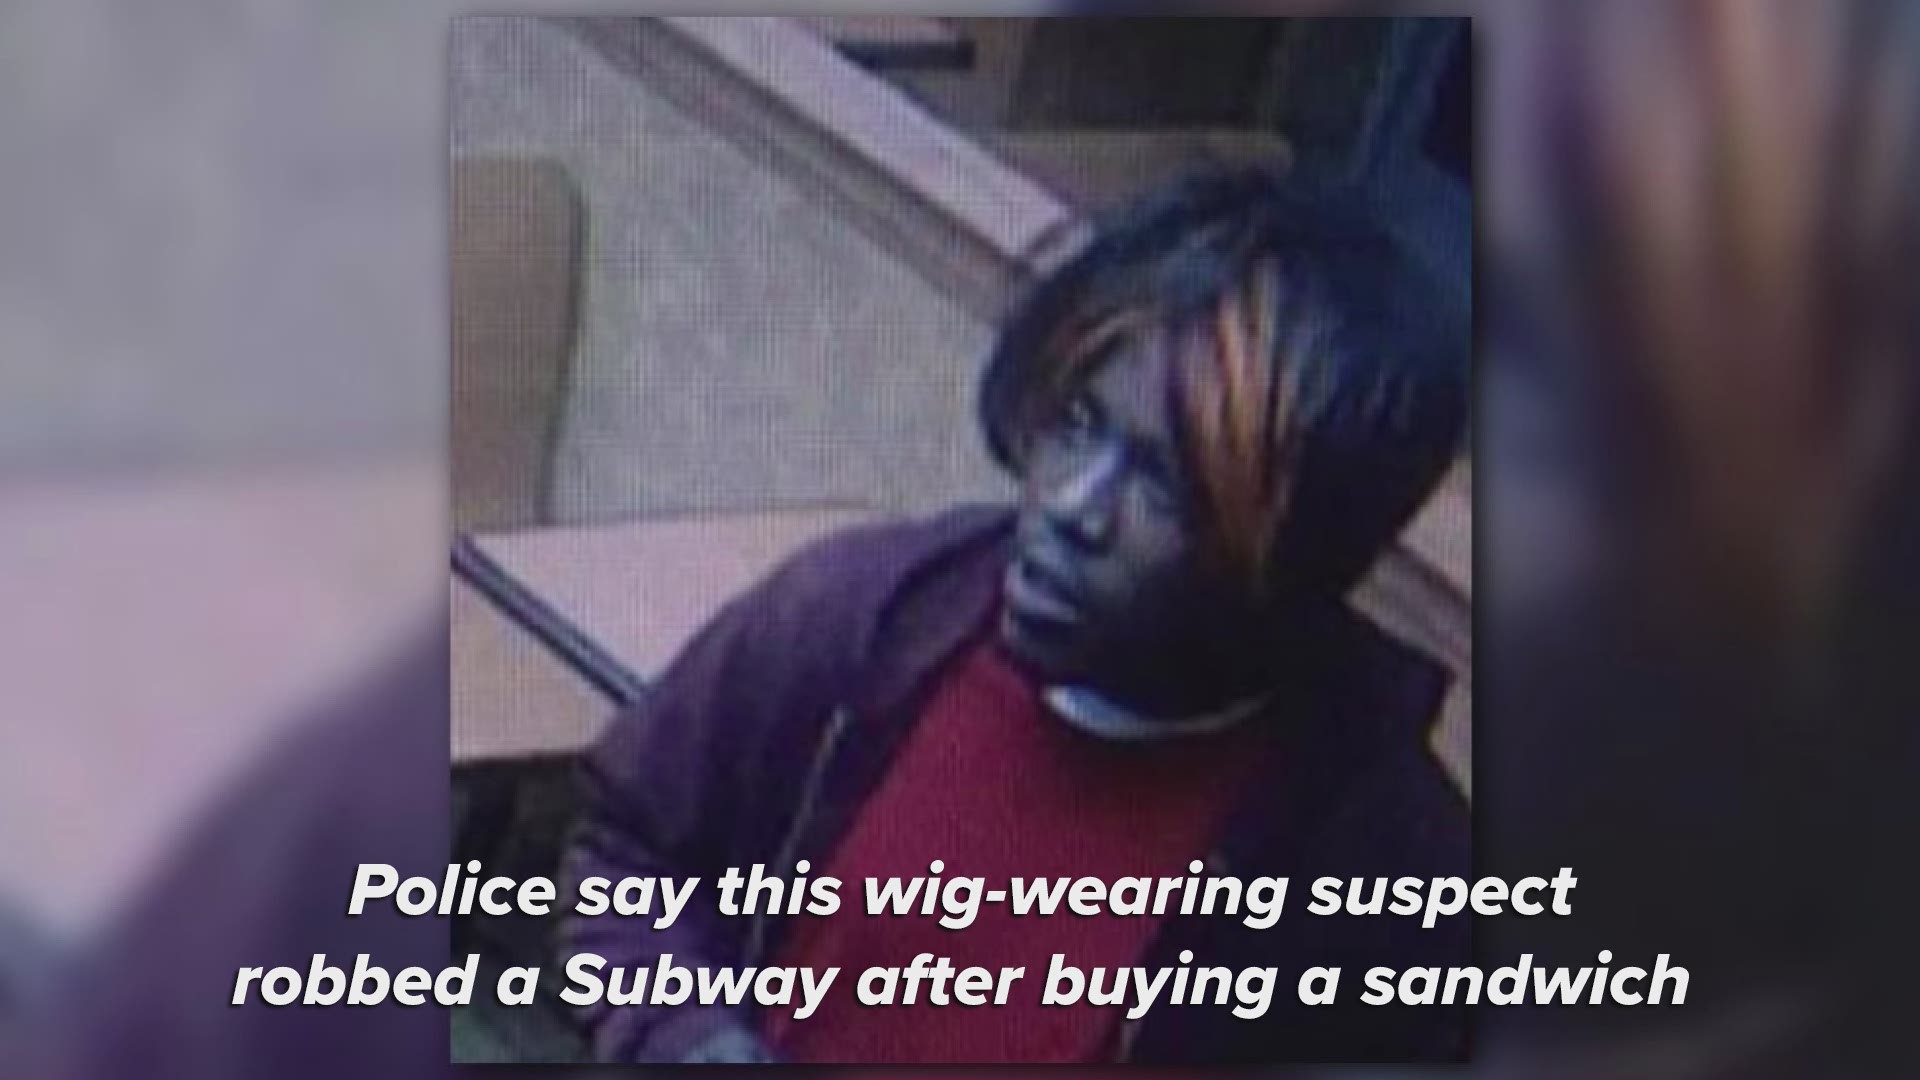 LRPD are looking for a wig-wearing suspect who they say robbed a Subway on Geyer Springs Road